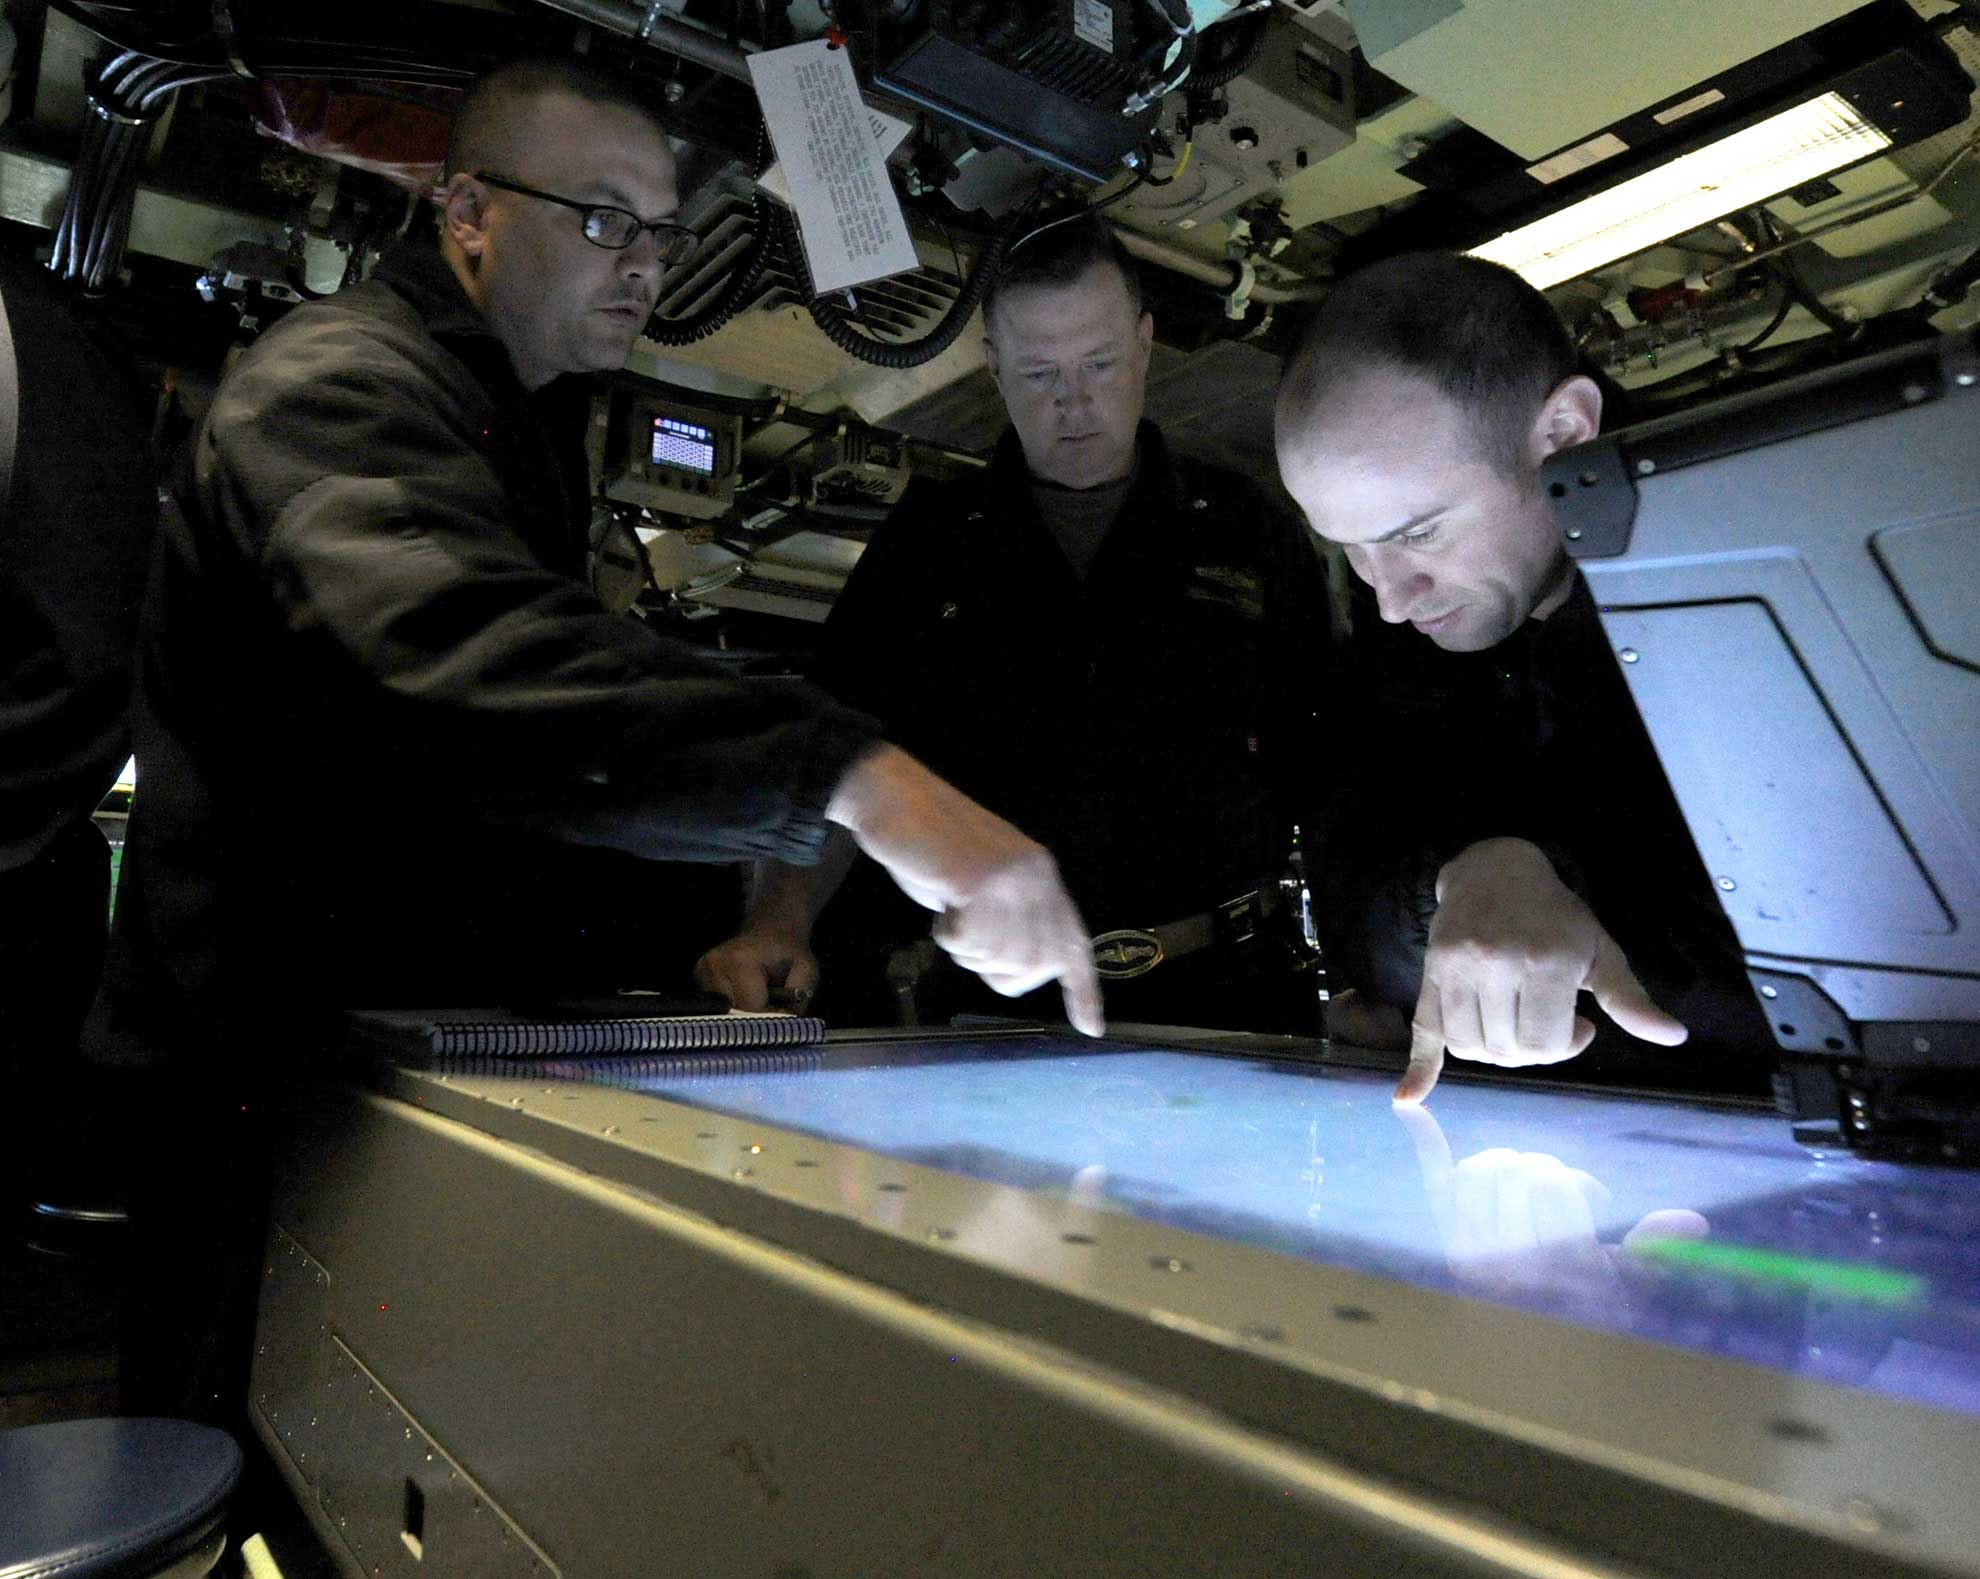 Atlantic Ocean (June 24, 2018) Cmdr. Jesse Zimbauer, center, commanding officer of the Virginia-class fast attack submarine Pre-Commissioning Unit (PCU) Indiana (SSN 789) observes the review of navigational charts while underway. Indiana is the 16th Virginia-class fast attack submarine and is scheduled to be commissioned Sept. 29, 2018 -- U.S. Navy photo by Chief MCS Darryl Wood. -